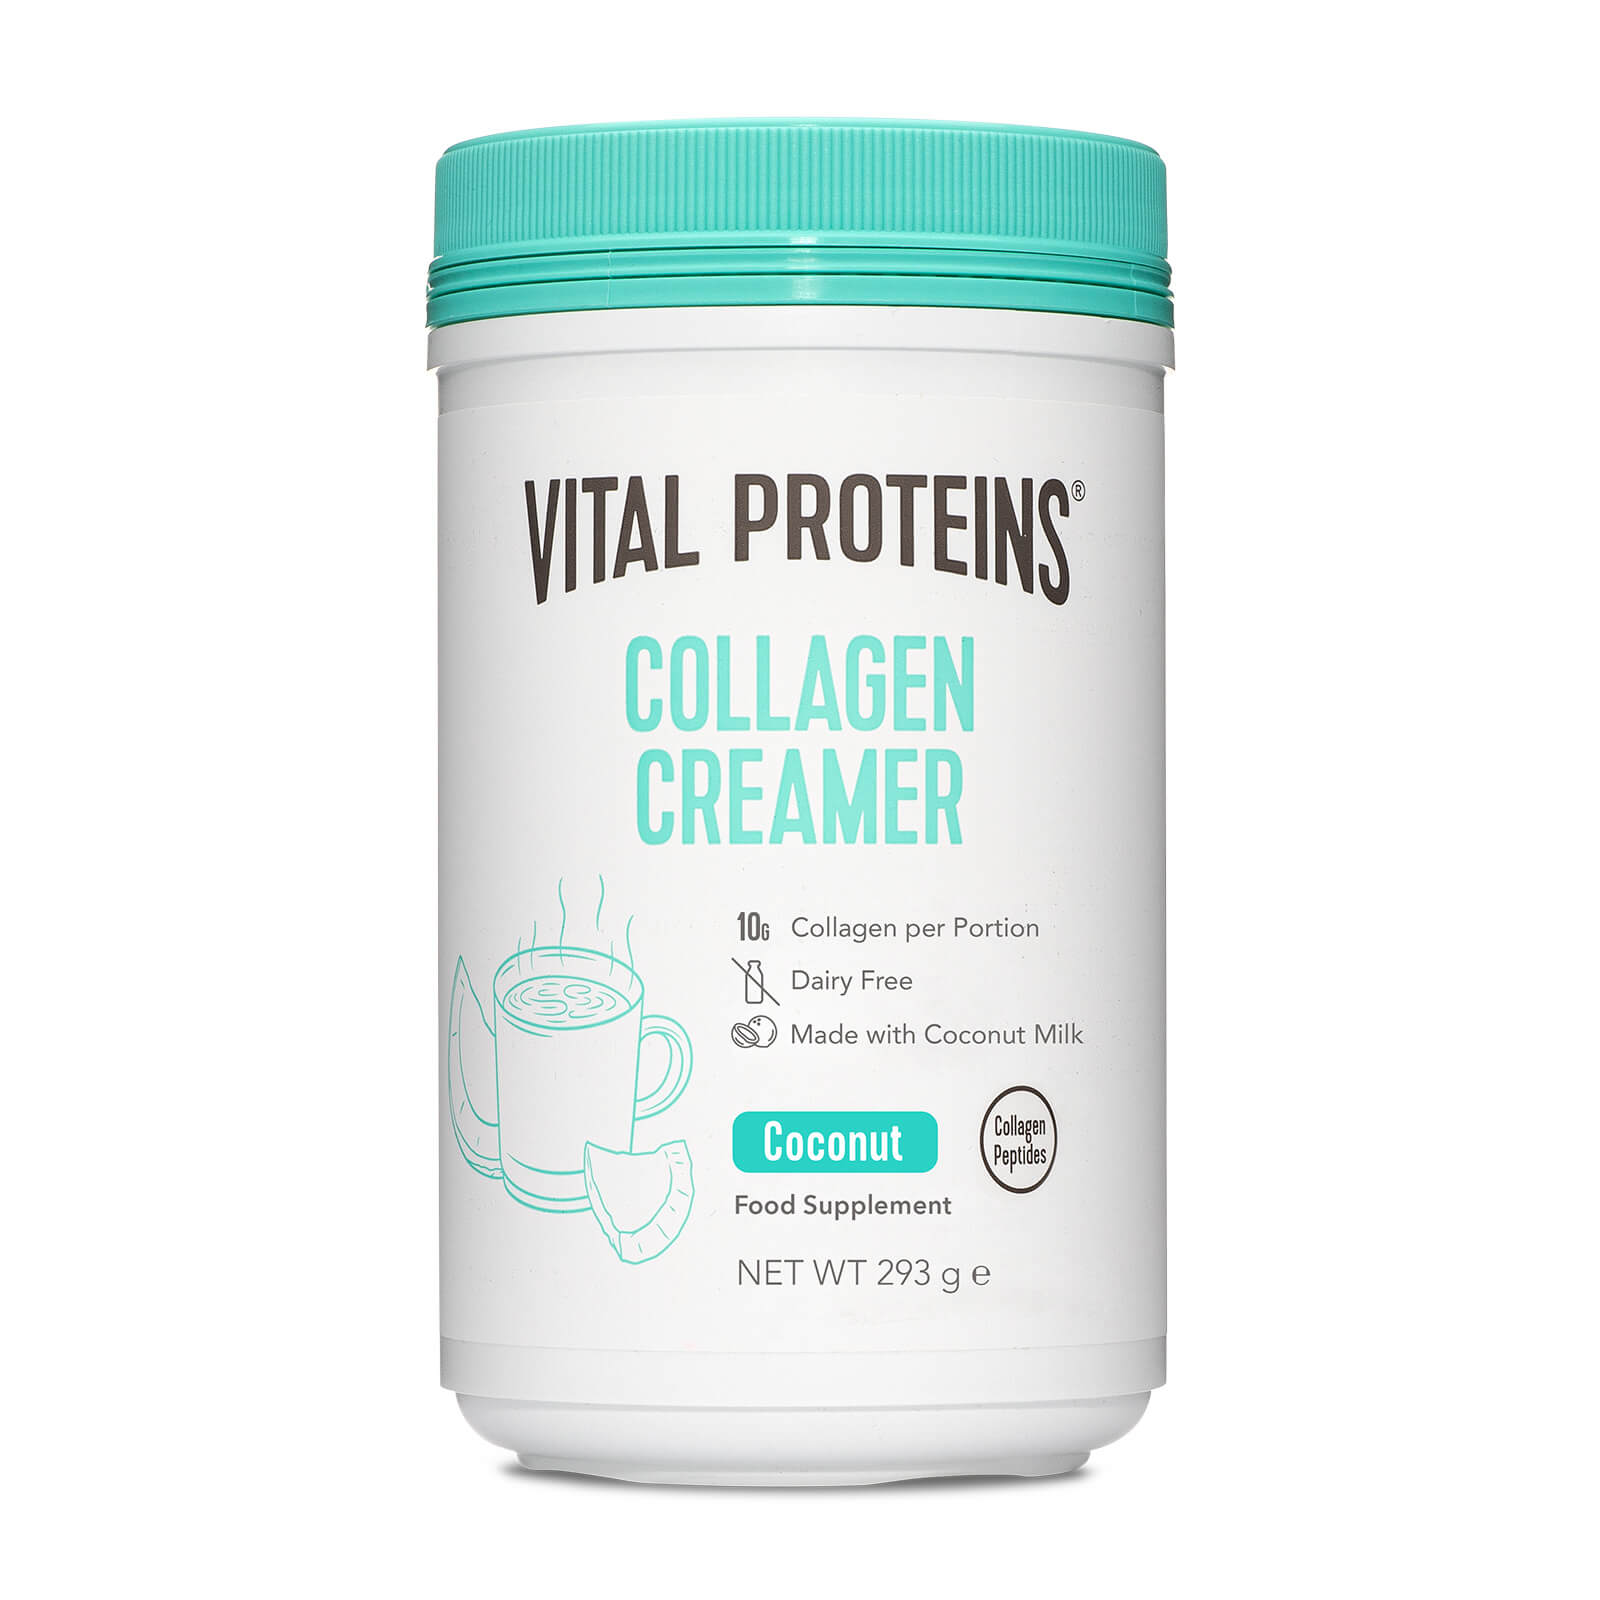 Collagen Creamer - Coconut Subscription - Delivery Every 4 Months